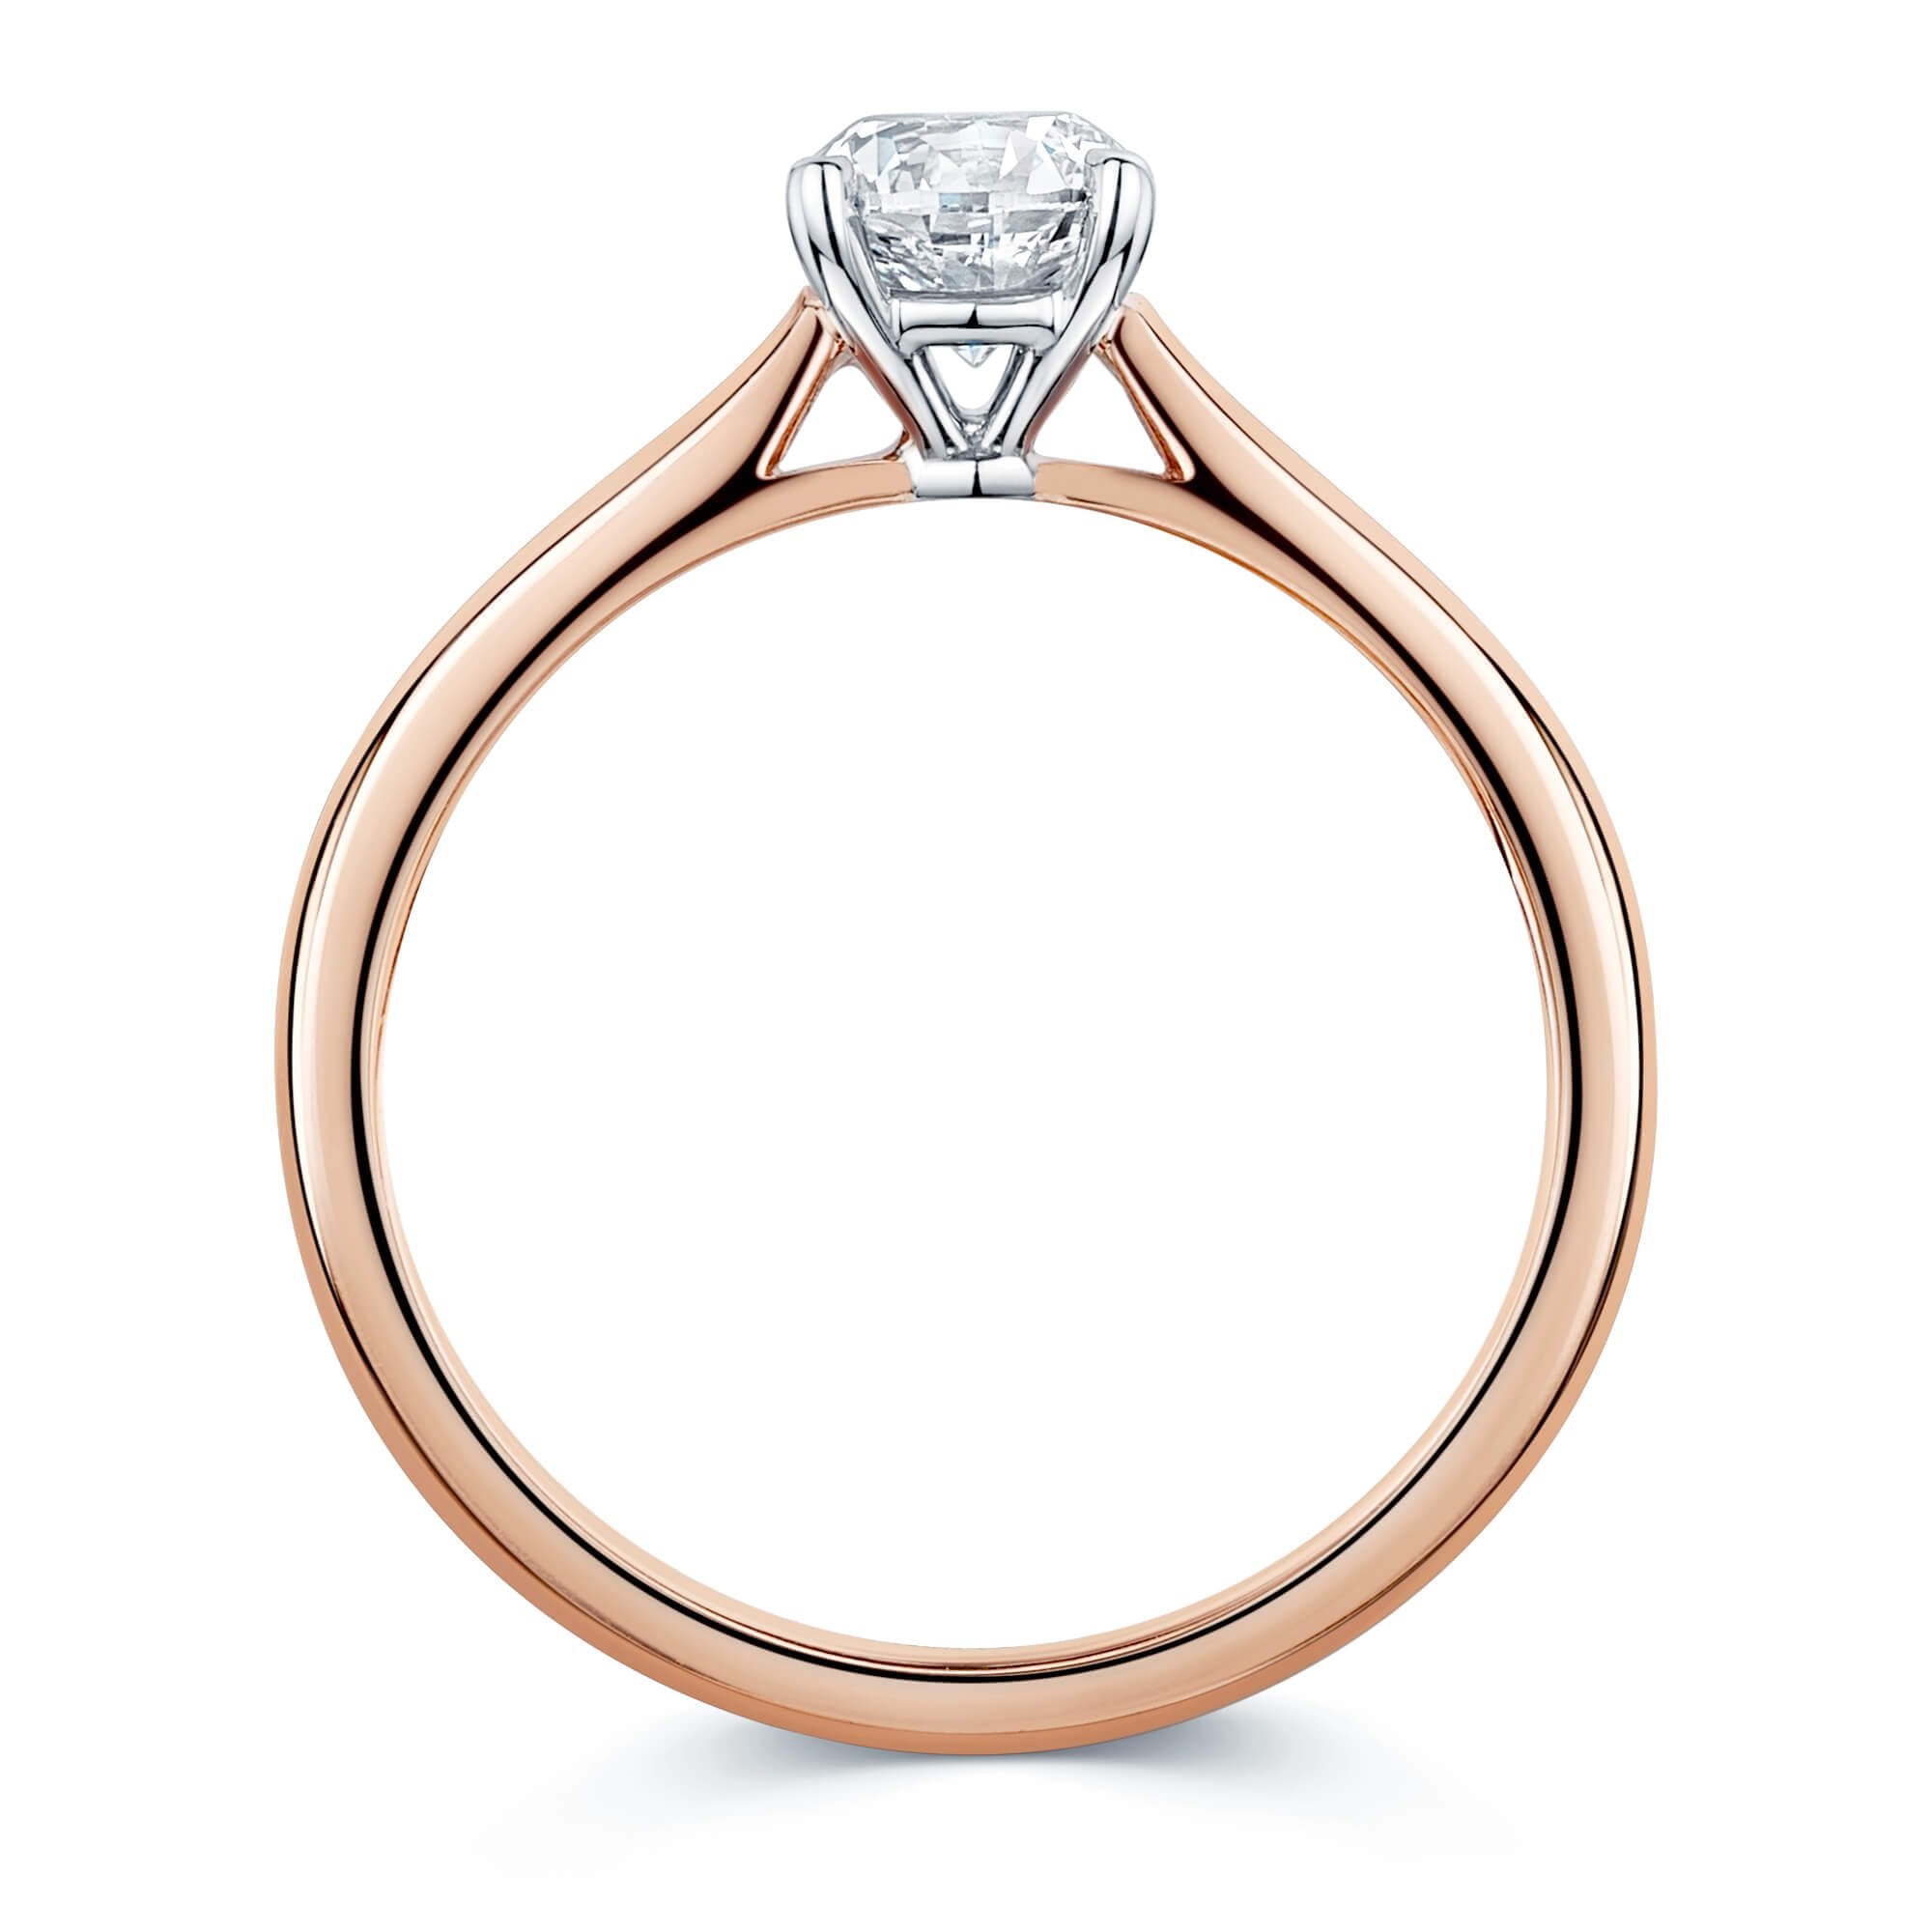 Simply Solitaire Collection 18ct Rose Gold Diamond Solitaire Engagement Ring GIA Certified 0.70 Carat